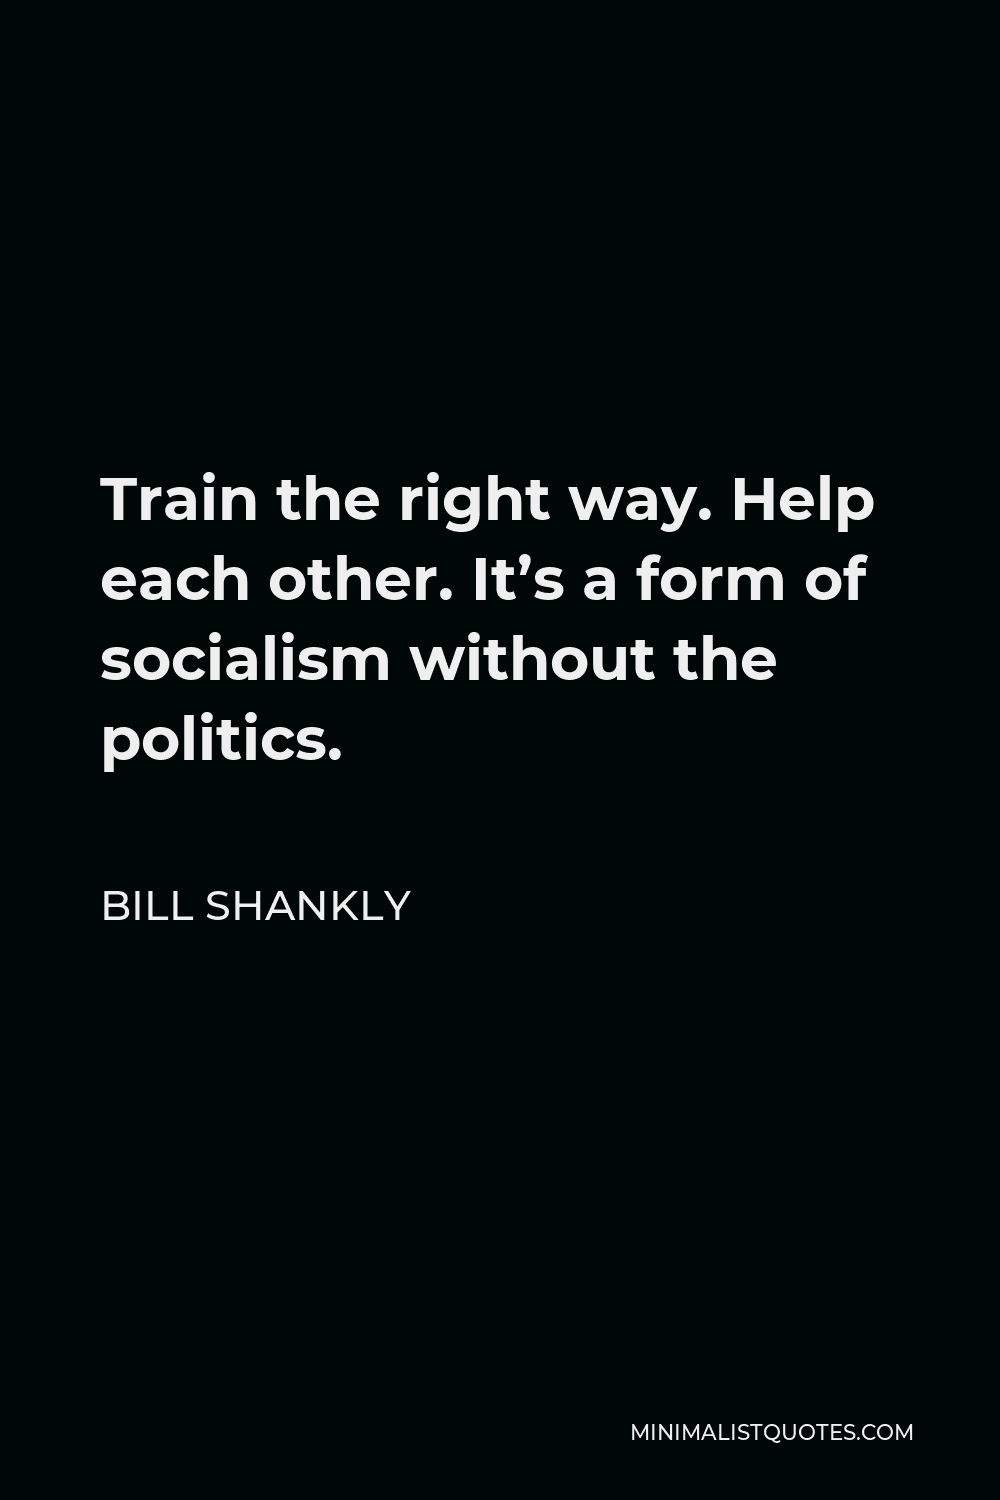 Bill Shankly Quote - Train the right way. Help each other. It’s a form of socialism without the politics.